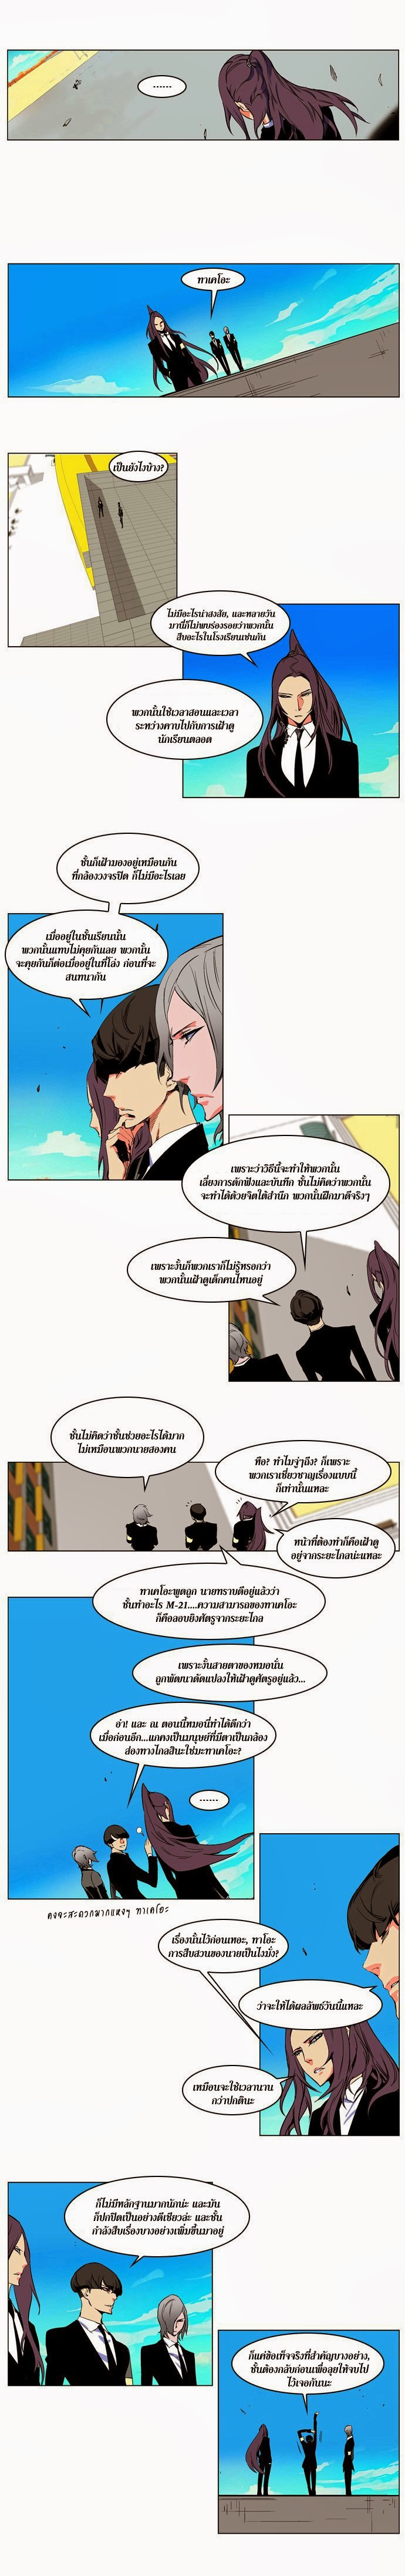 Noblesse 207 006